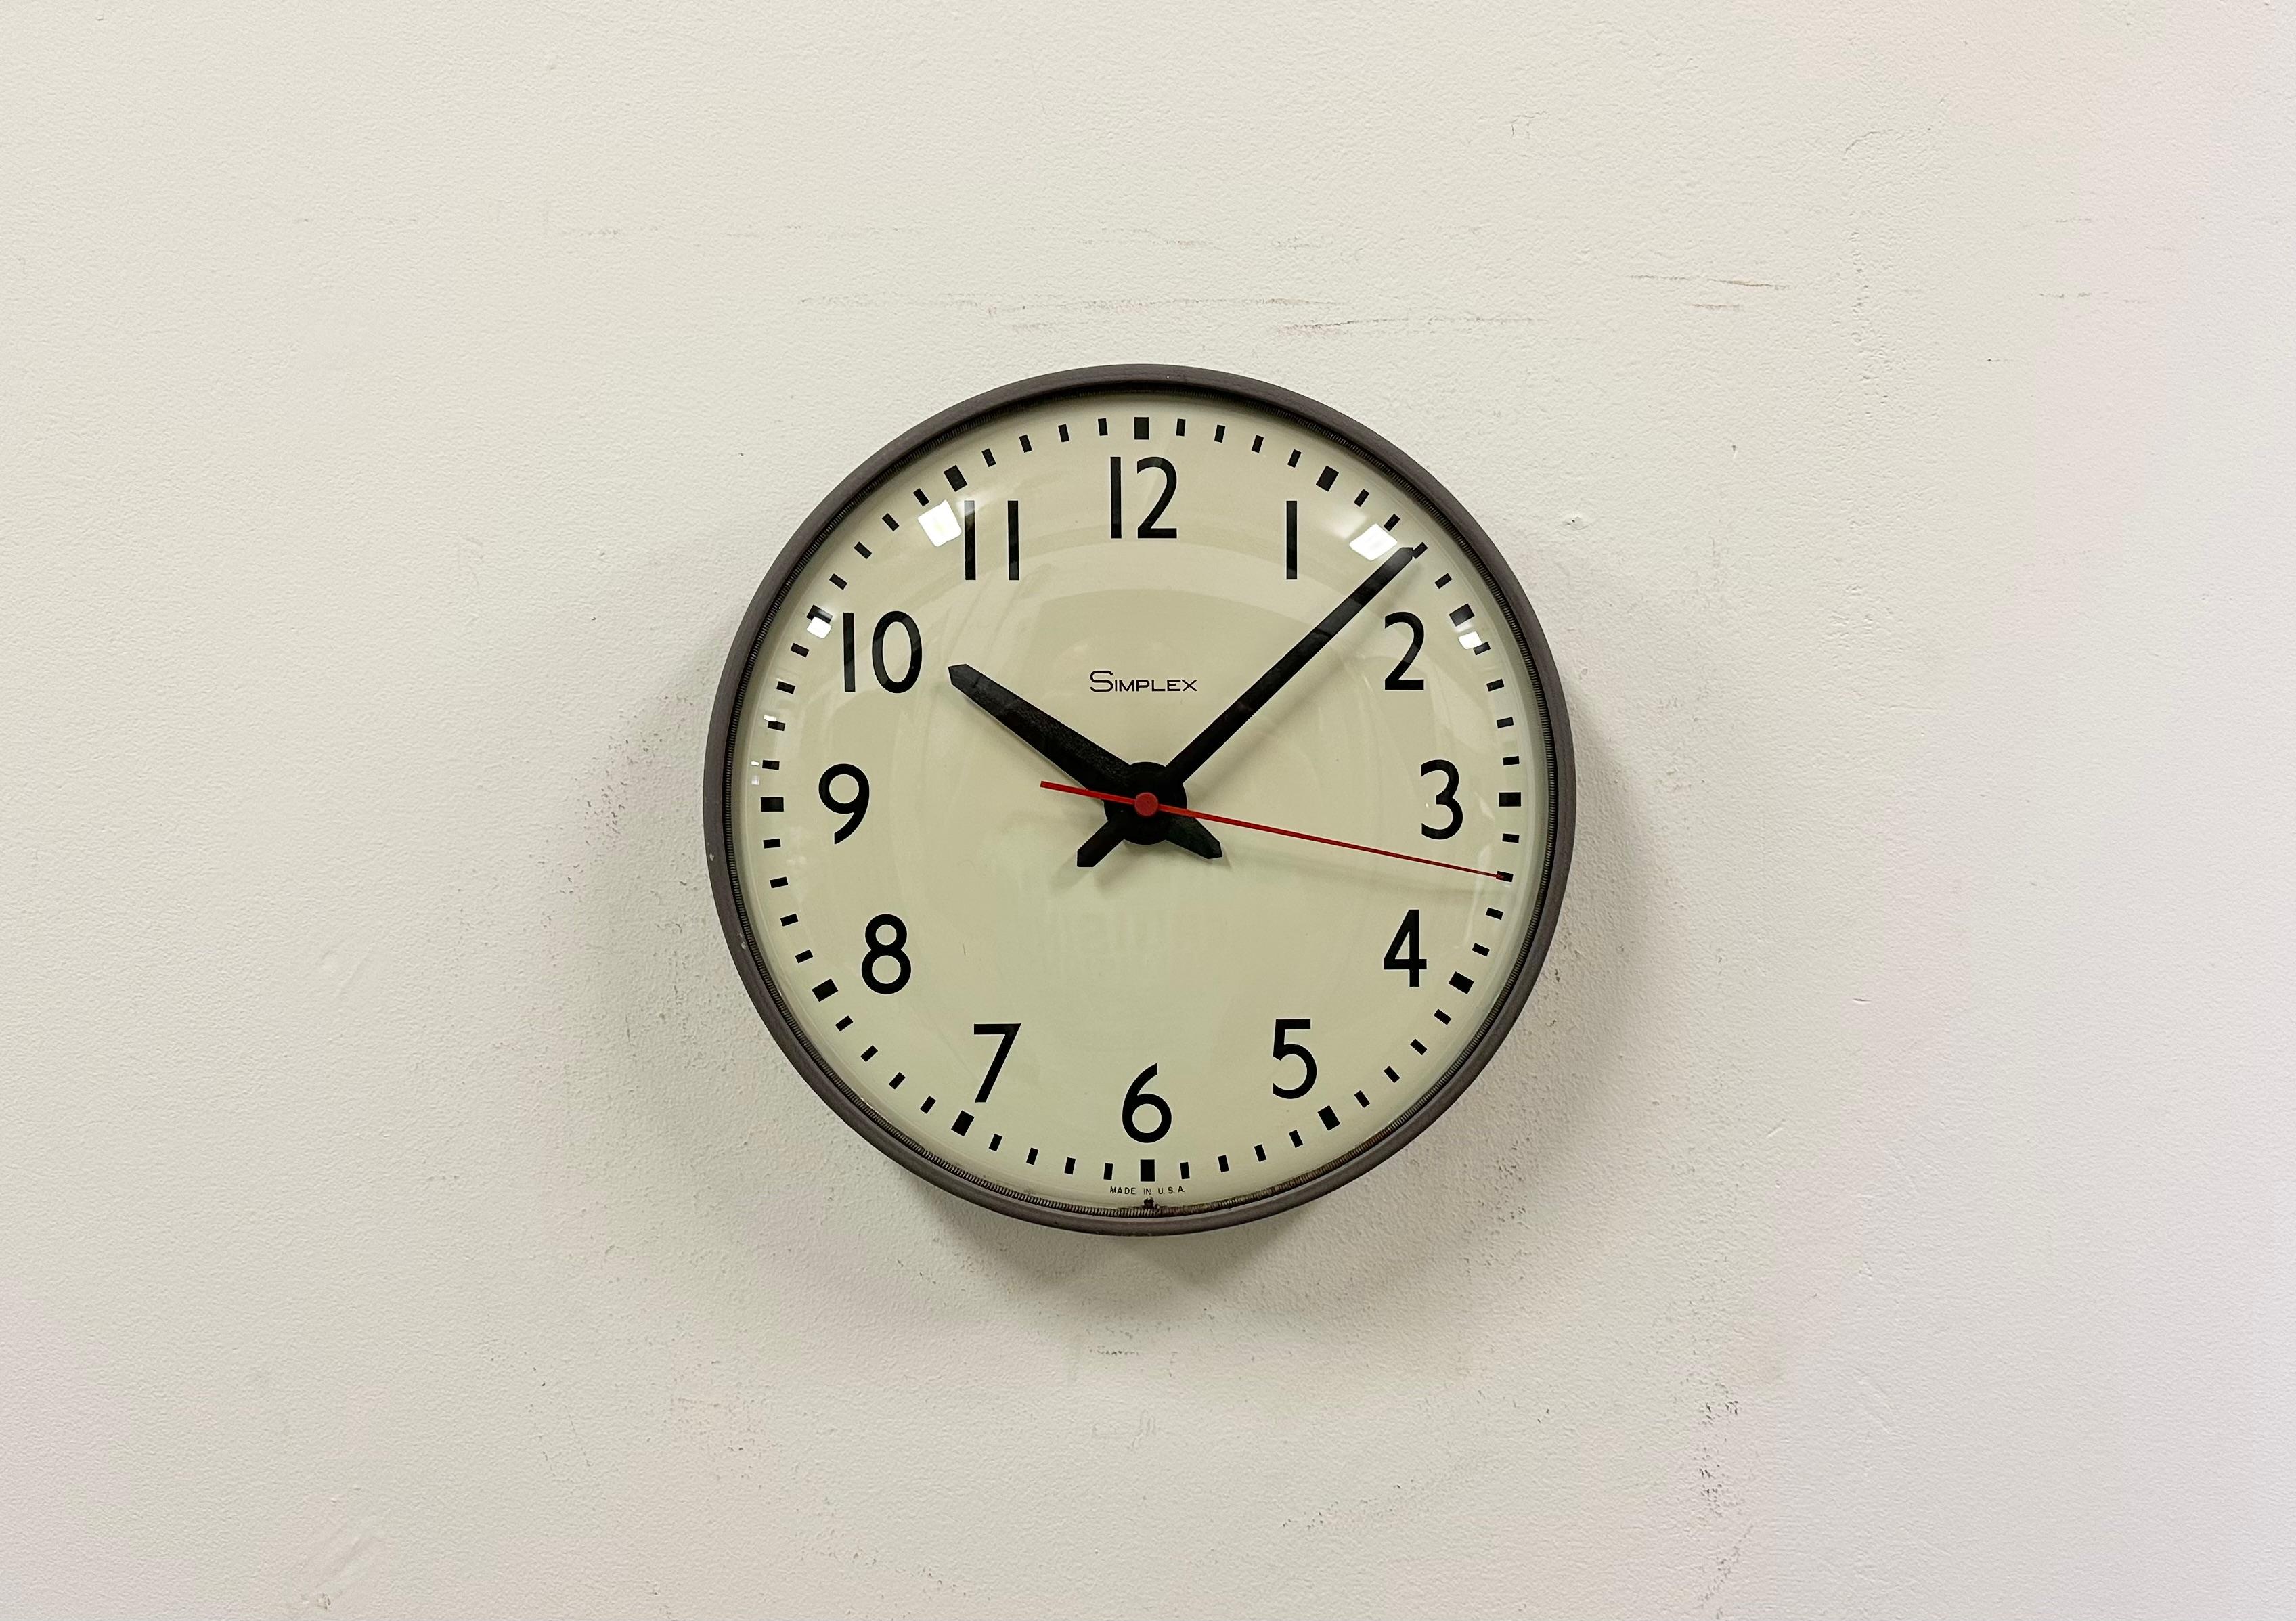 Wall clock made by Simplex Time Recorder Co. in U.S.A. during the 1970s-1980s. It features a grey iron frame, a metal dial, an aluminium hands and curved clear glass cover. The piece has been converted into a battery-powered clockwork and requires